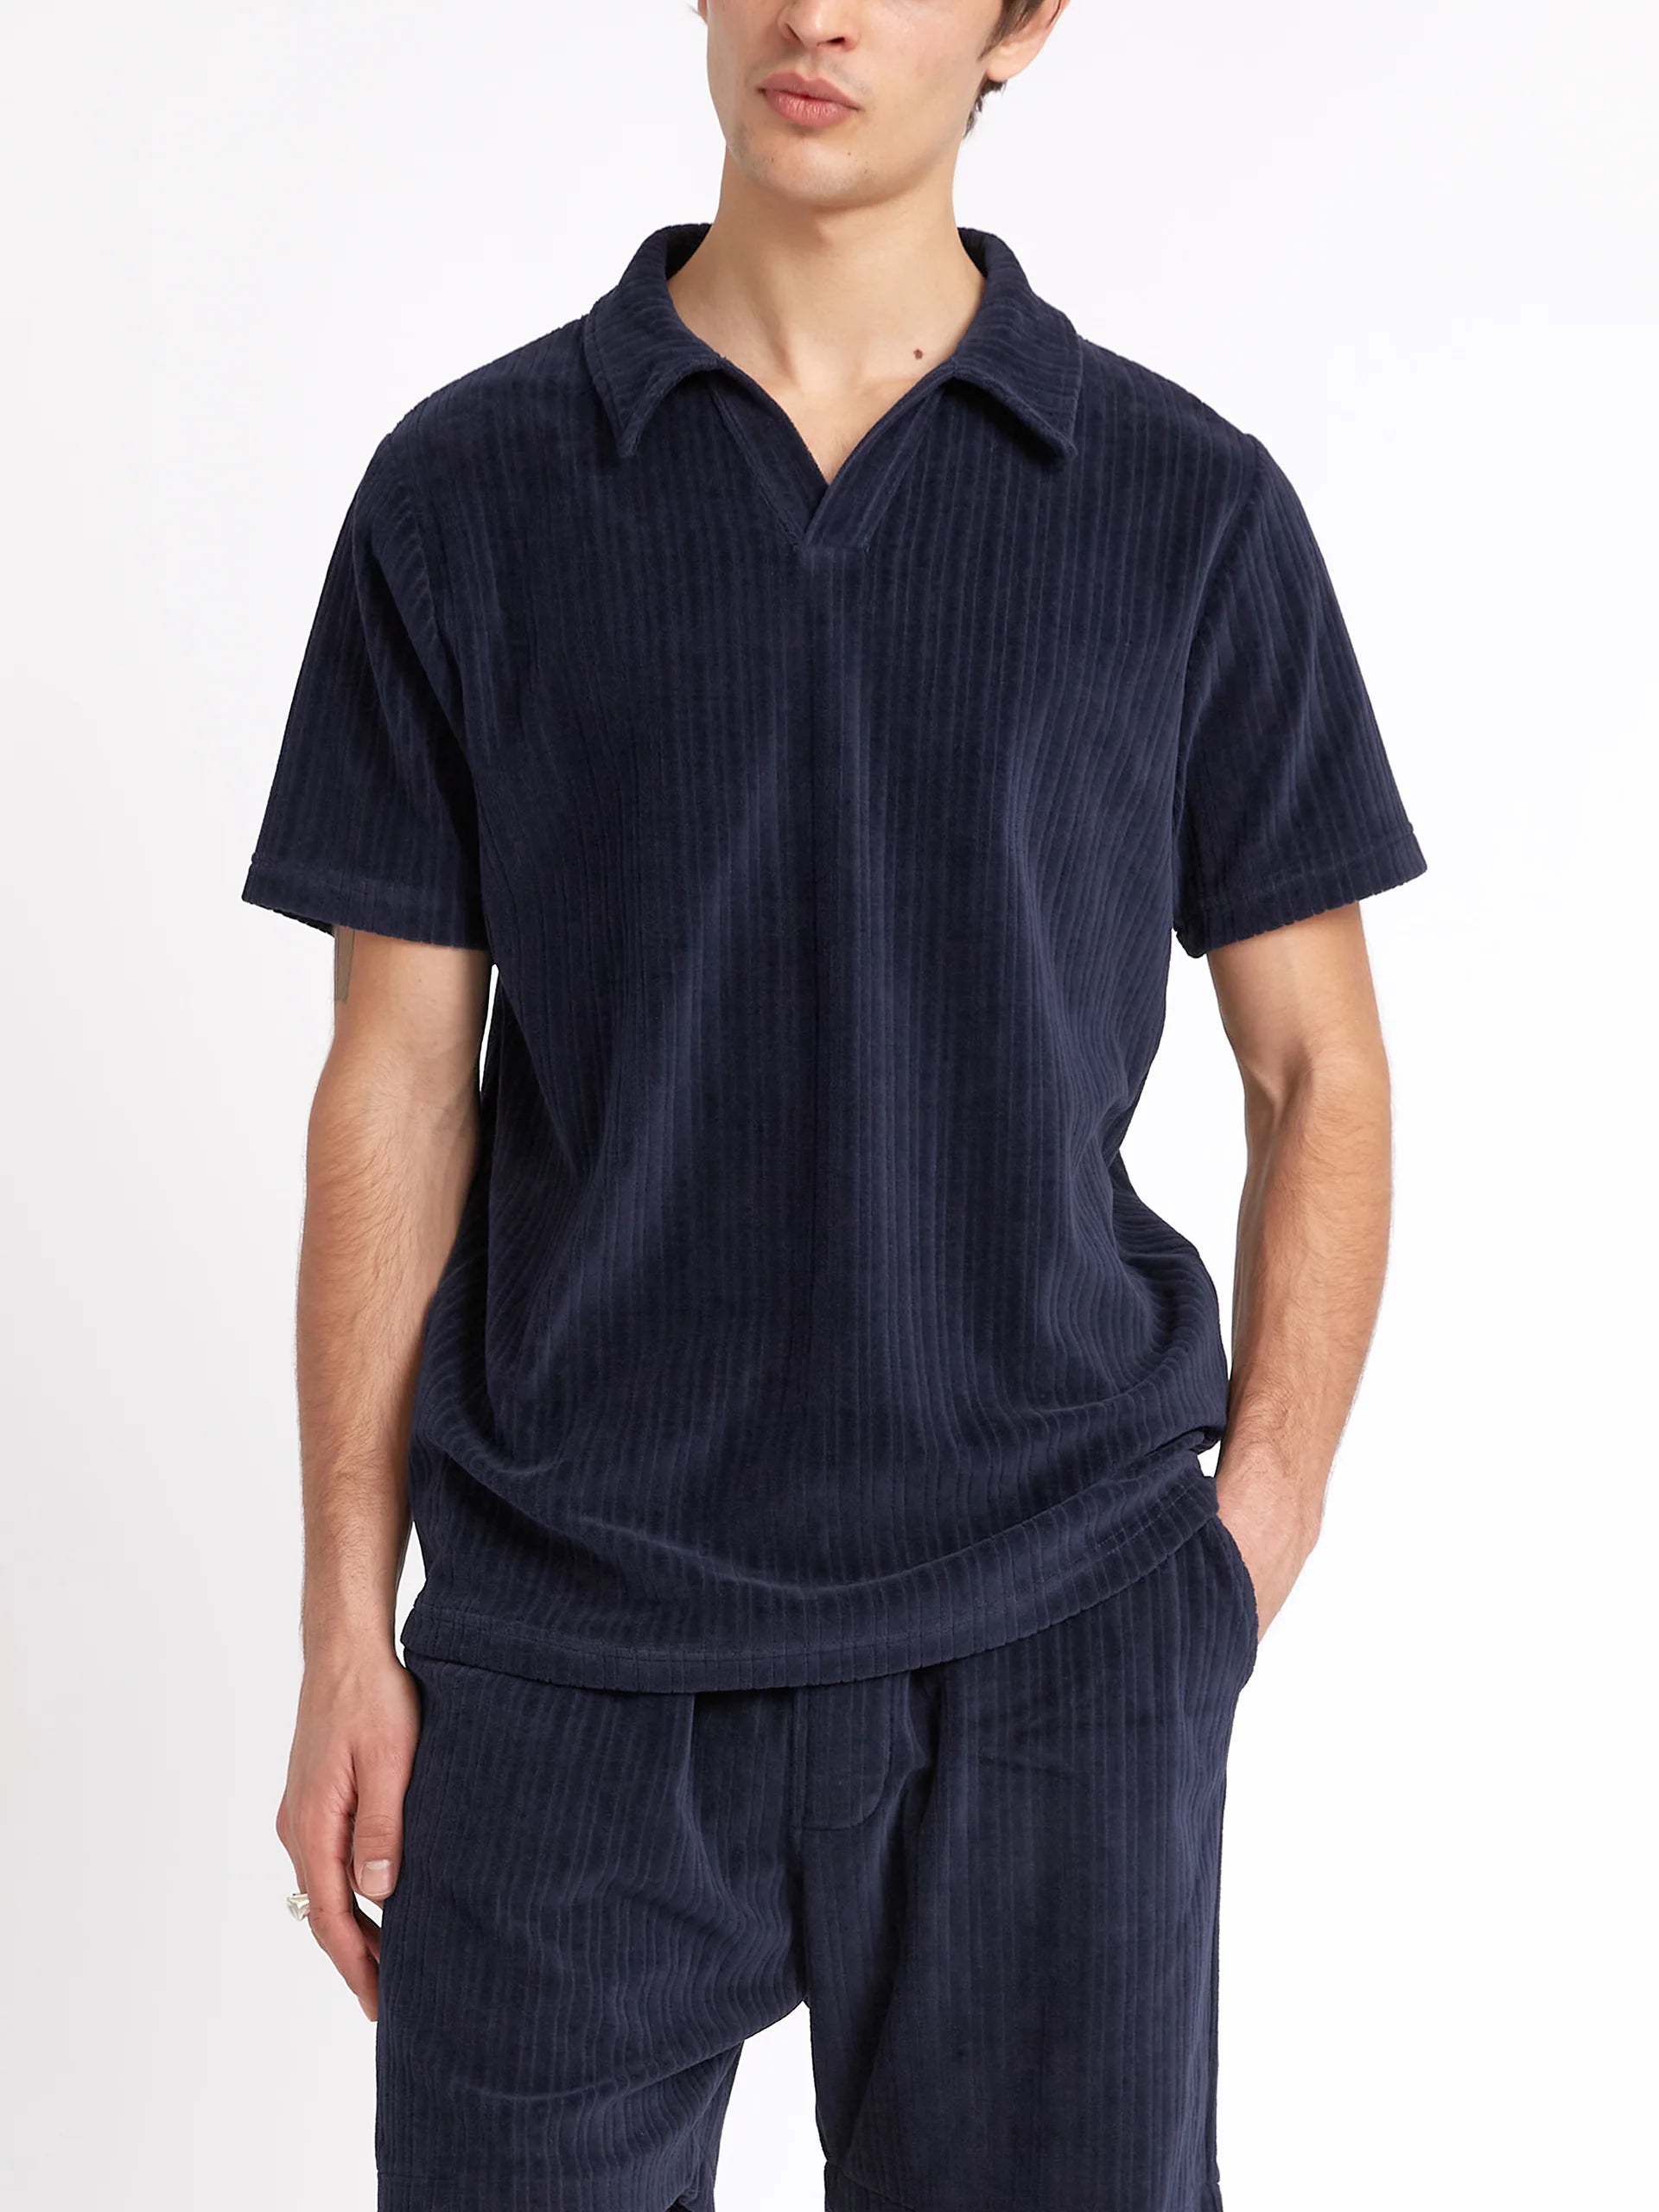 AUSTELL S/S POLO SHIRT - WILLOW NAVY